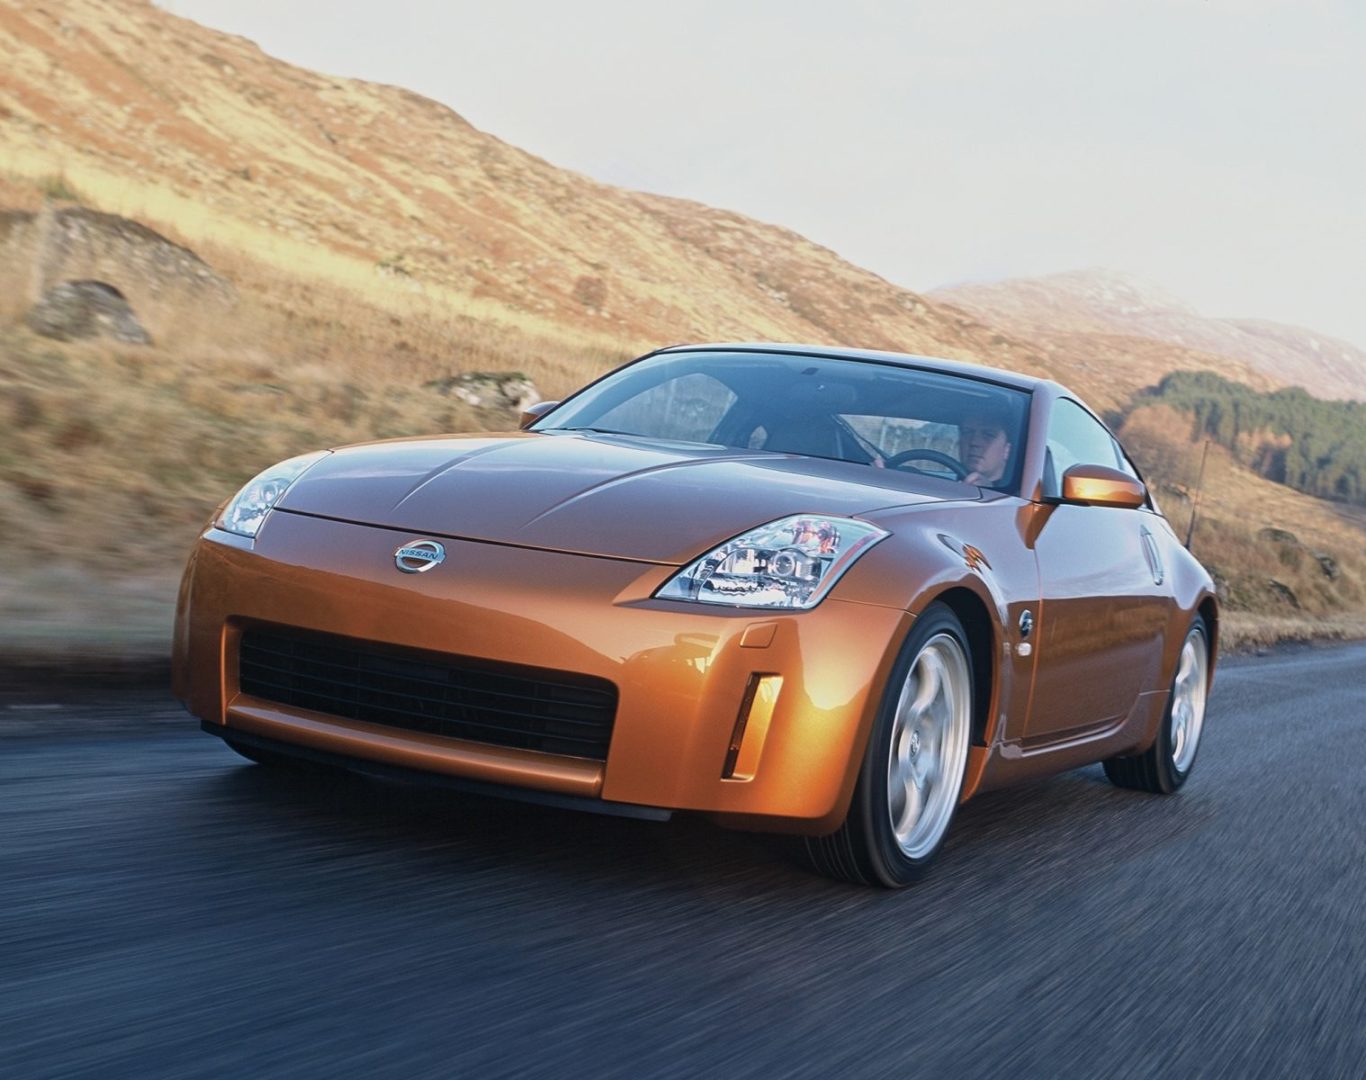 The Nissan 350Z reinvented the Z badge